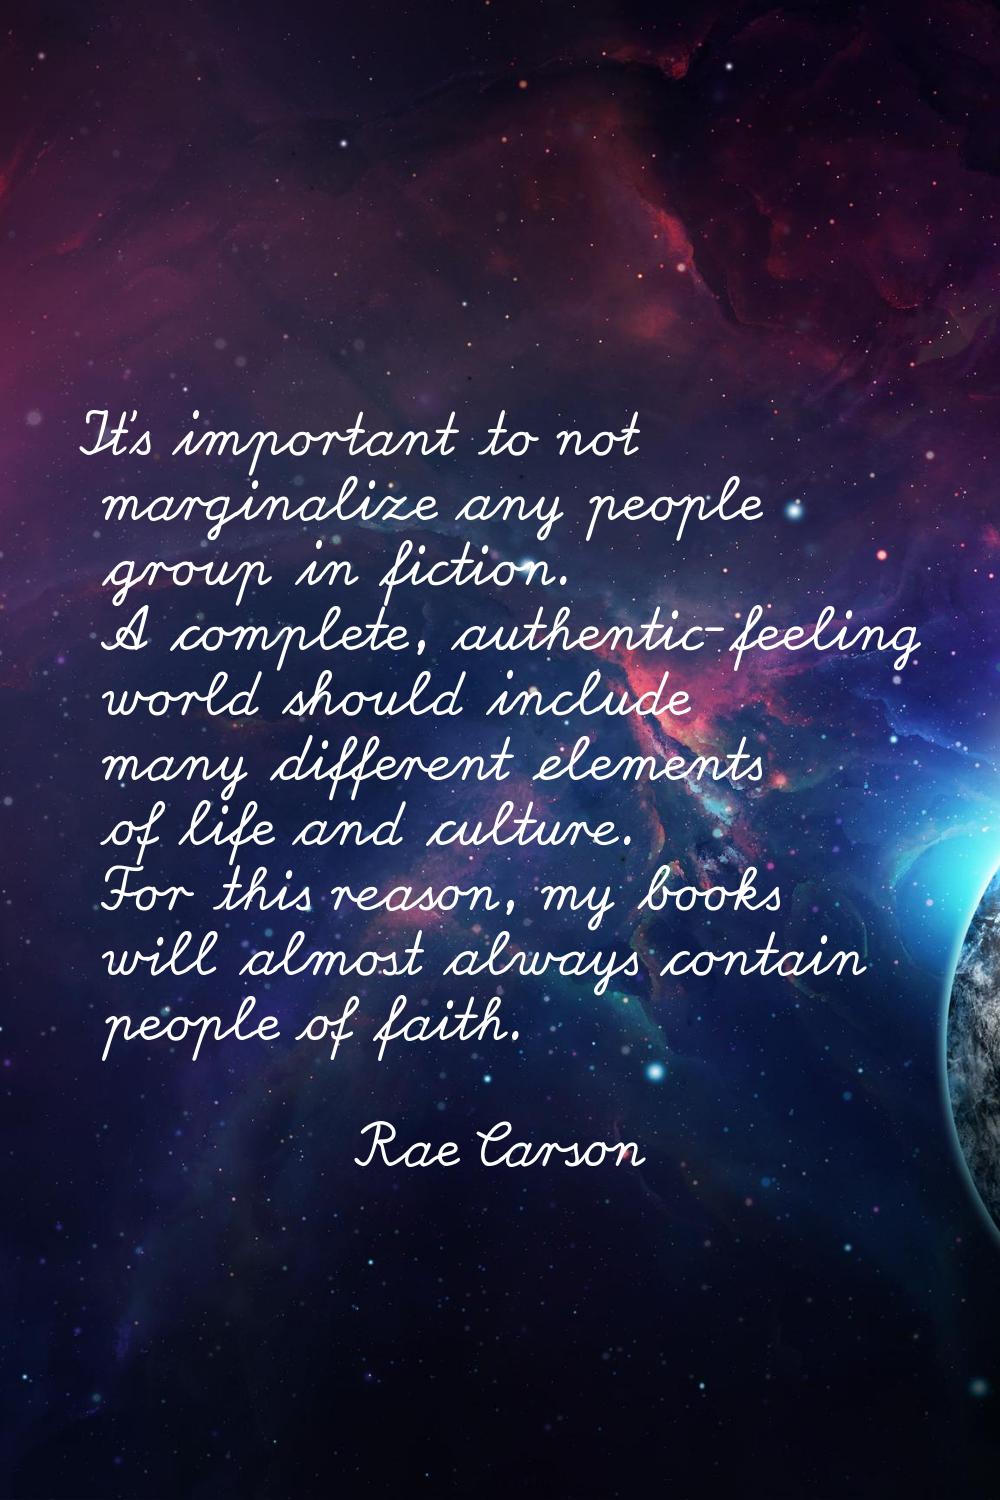 It's important to not marginalize any people group in fiction. A complete, authentic-feeling world 